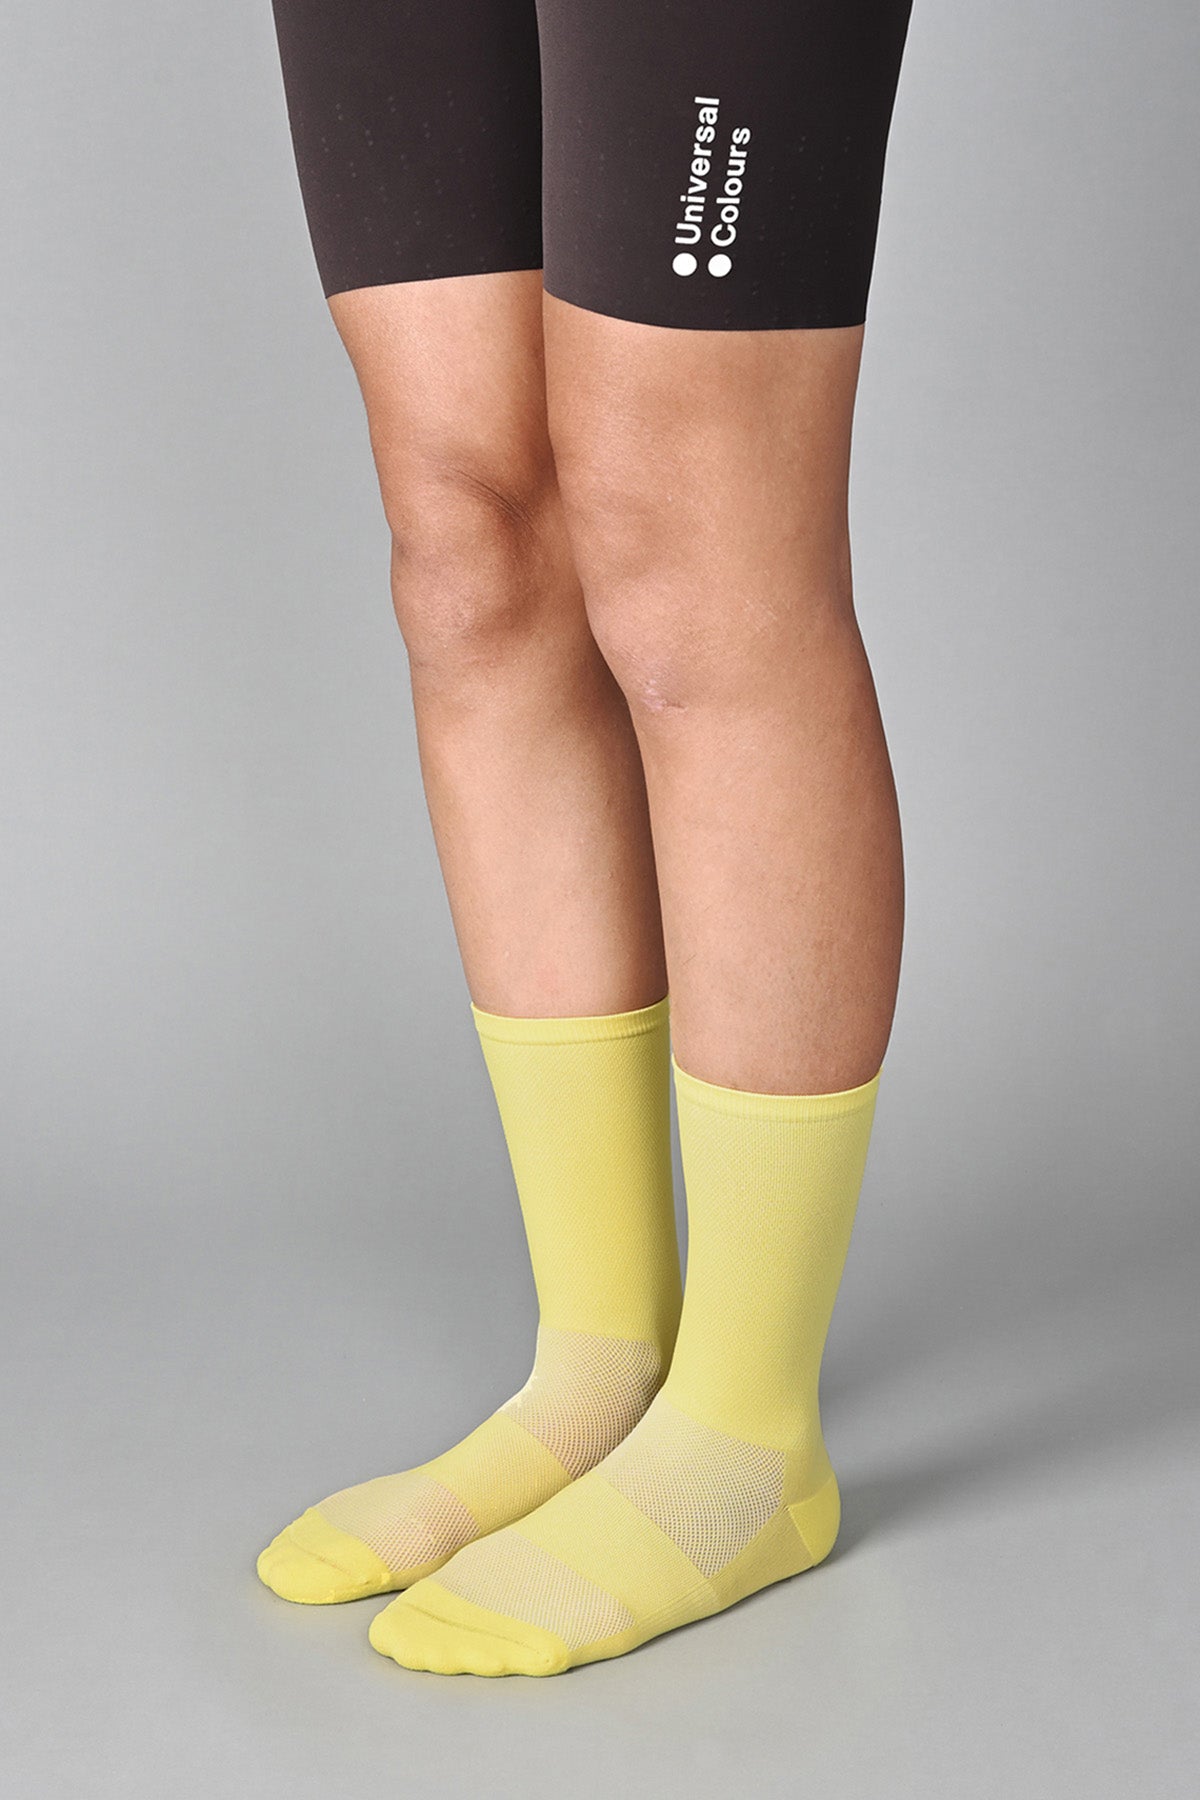 STEALTH - CANARY FRONT SIDE | BEST CYCLING SOCKS